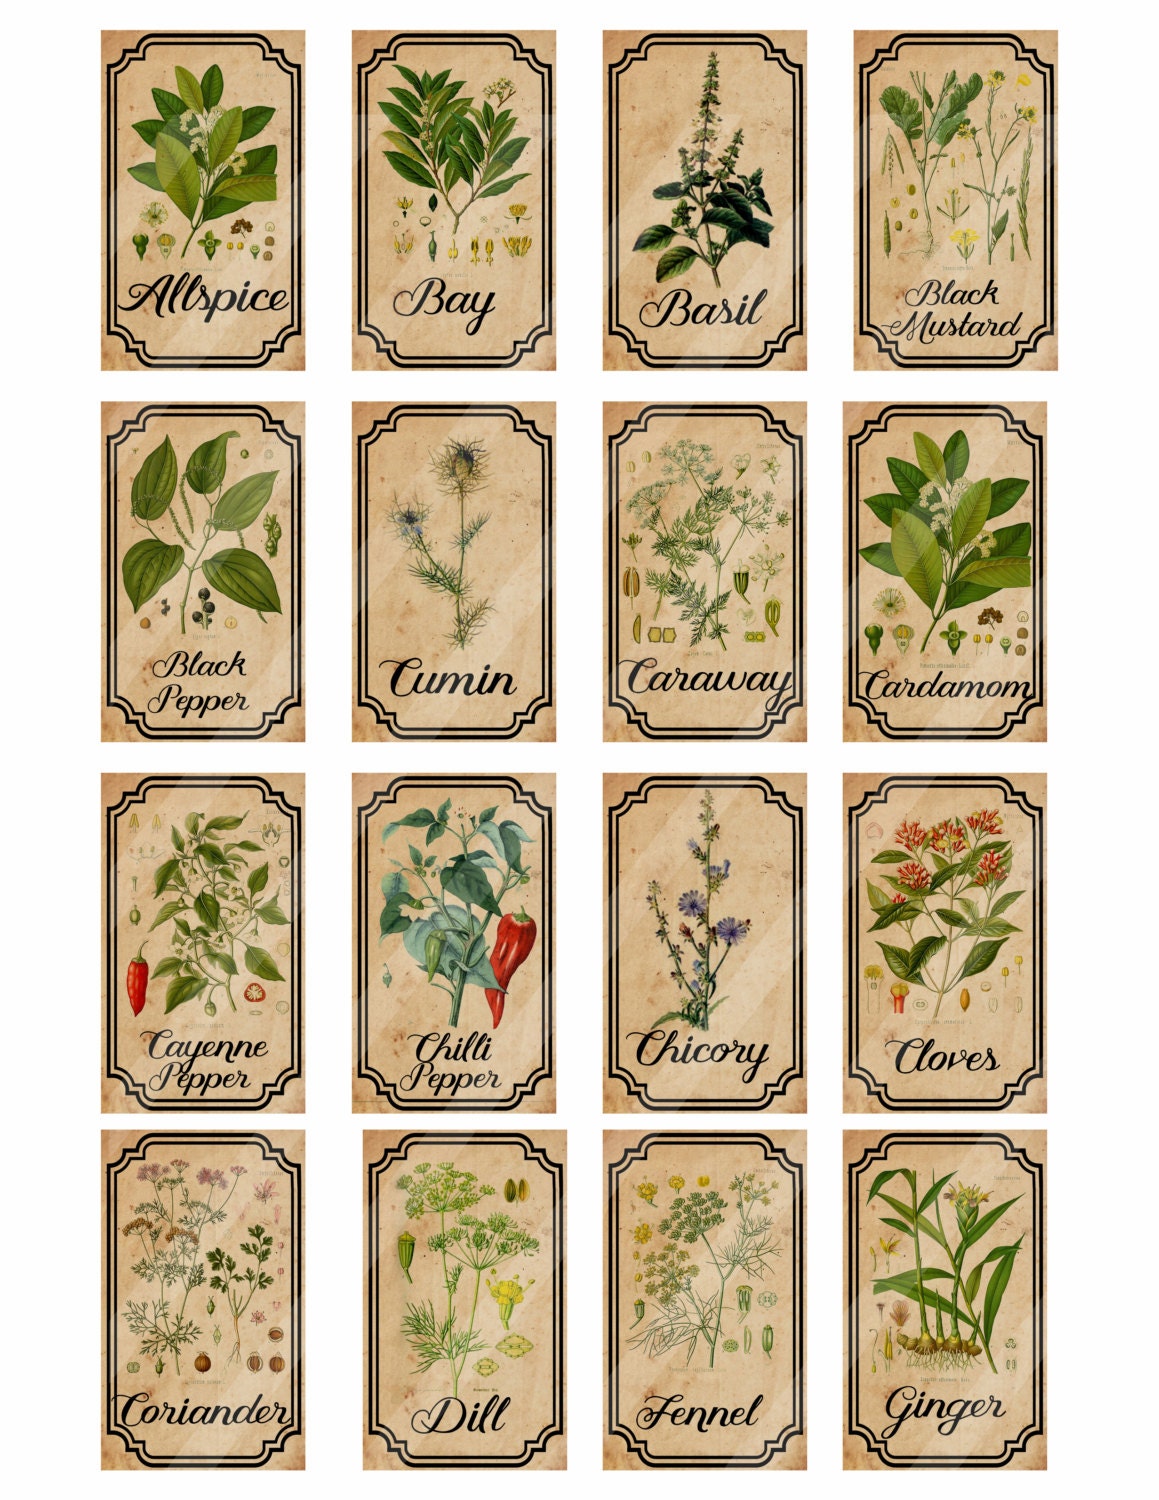 Herb and spice apothecary labels digital printable vintage